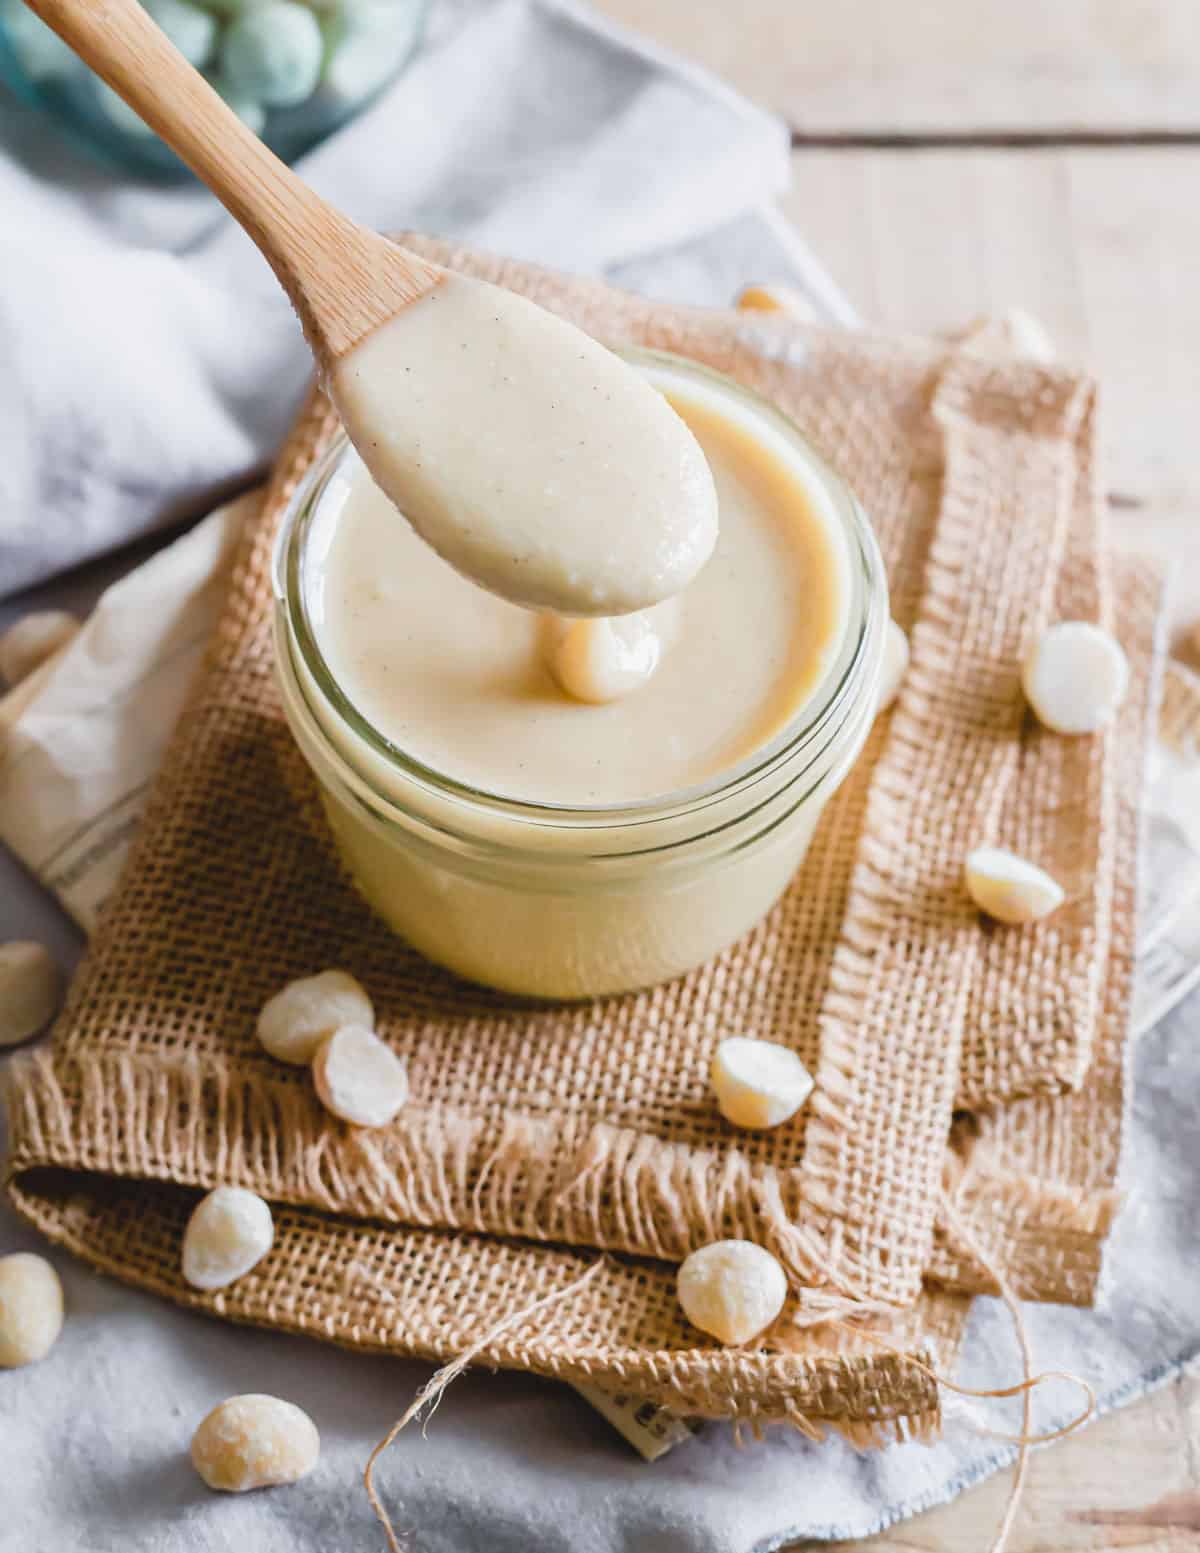 Spoonful of creamy macadamia nut butter.